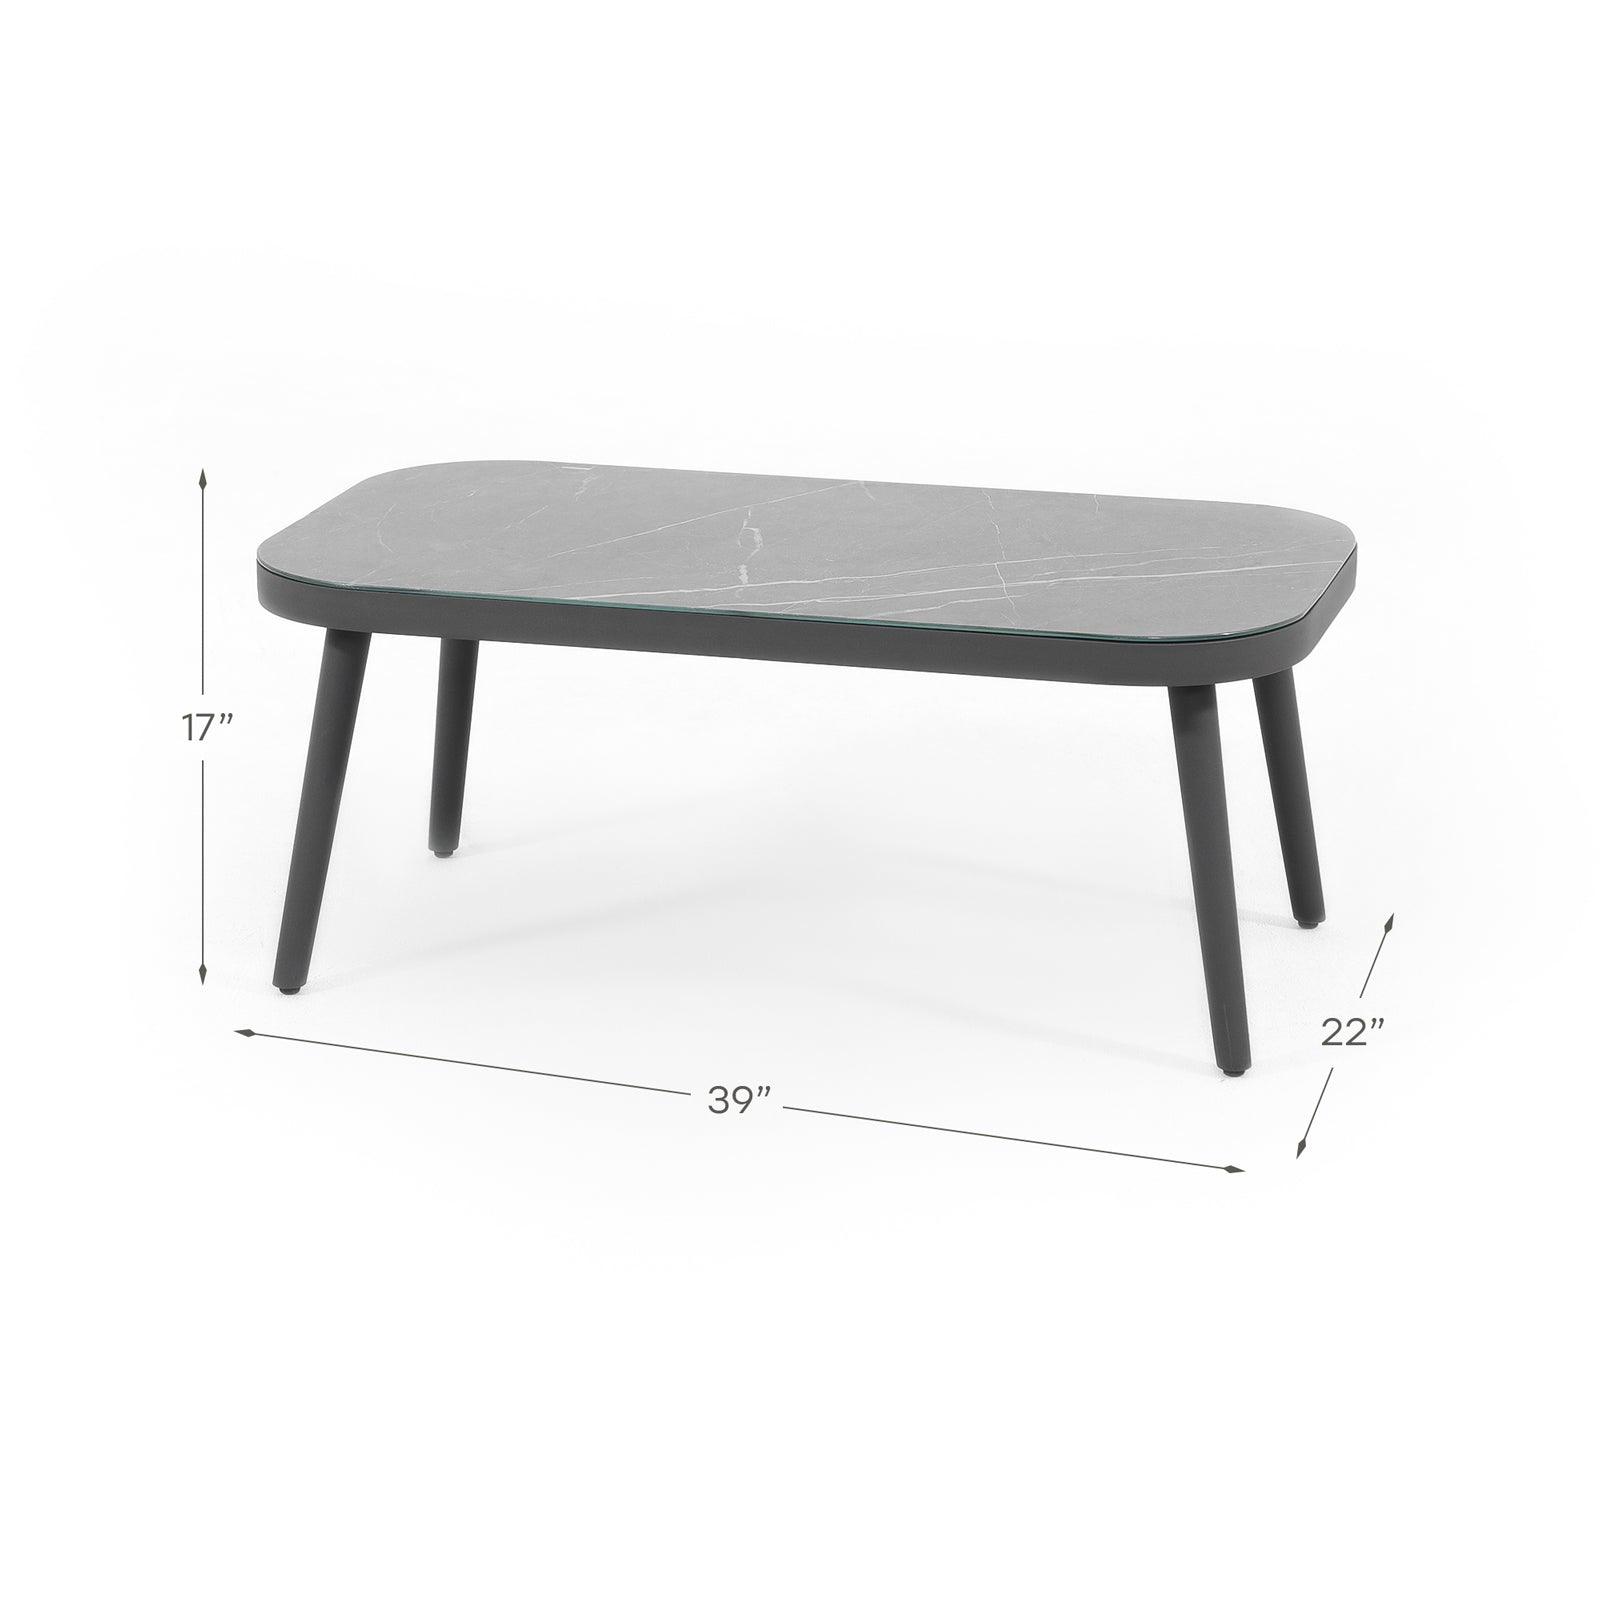 Comino dark grey glass Table-top Coffee Table with aluminum frame, side view, Dimension drawing - Jardina Furniture